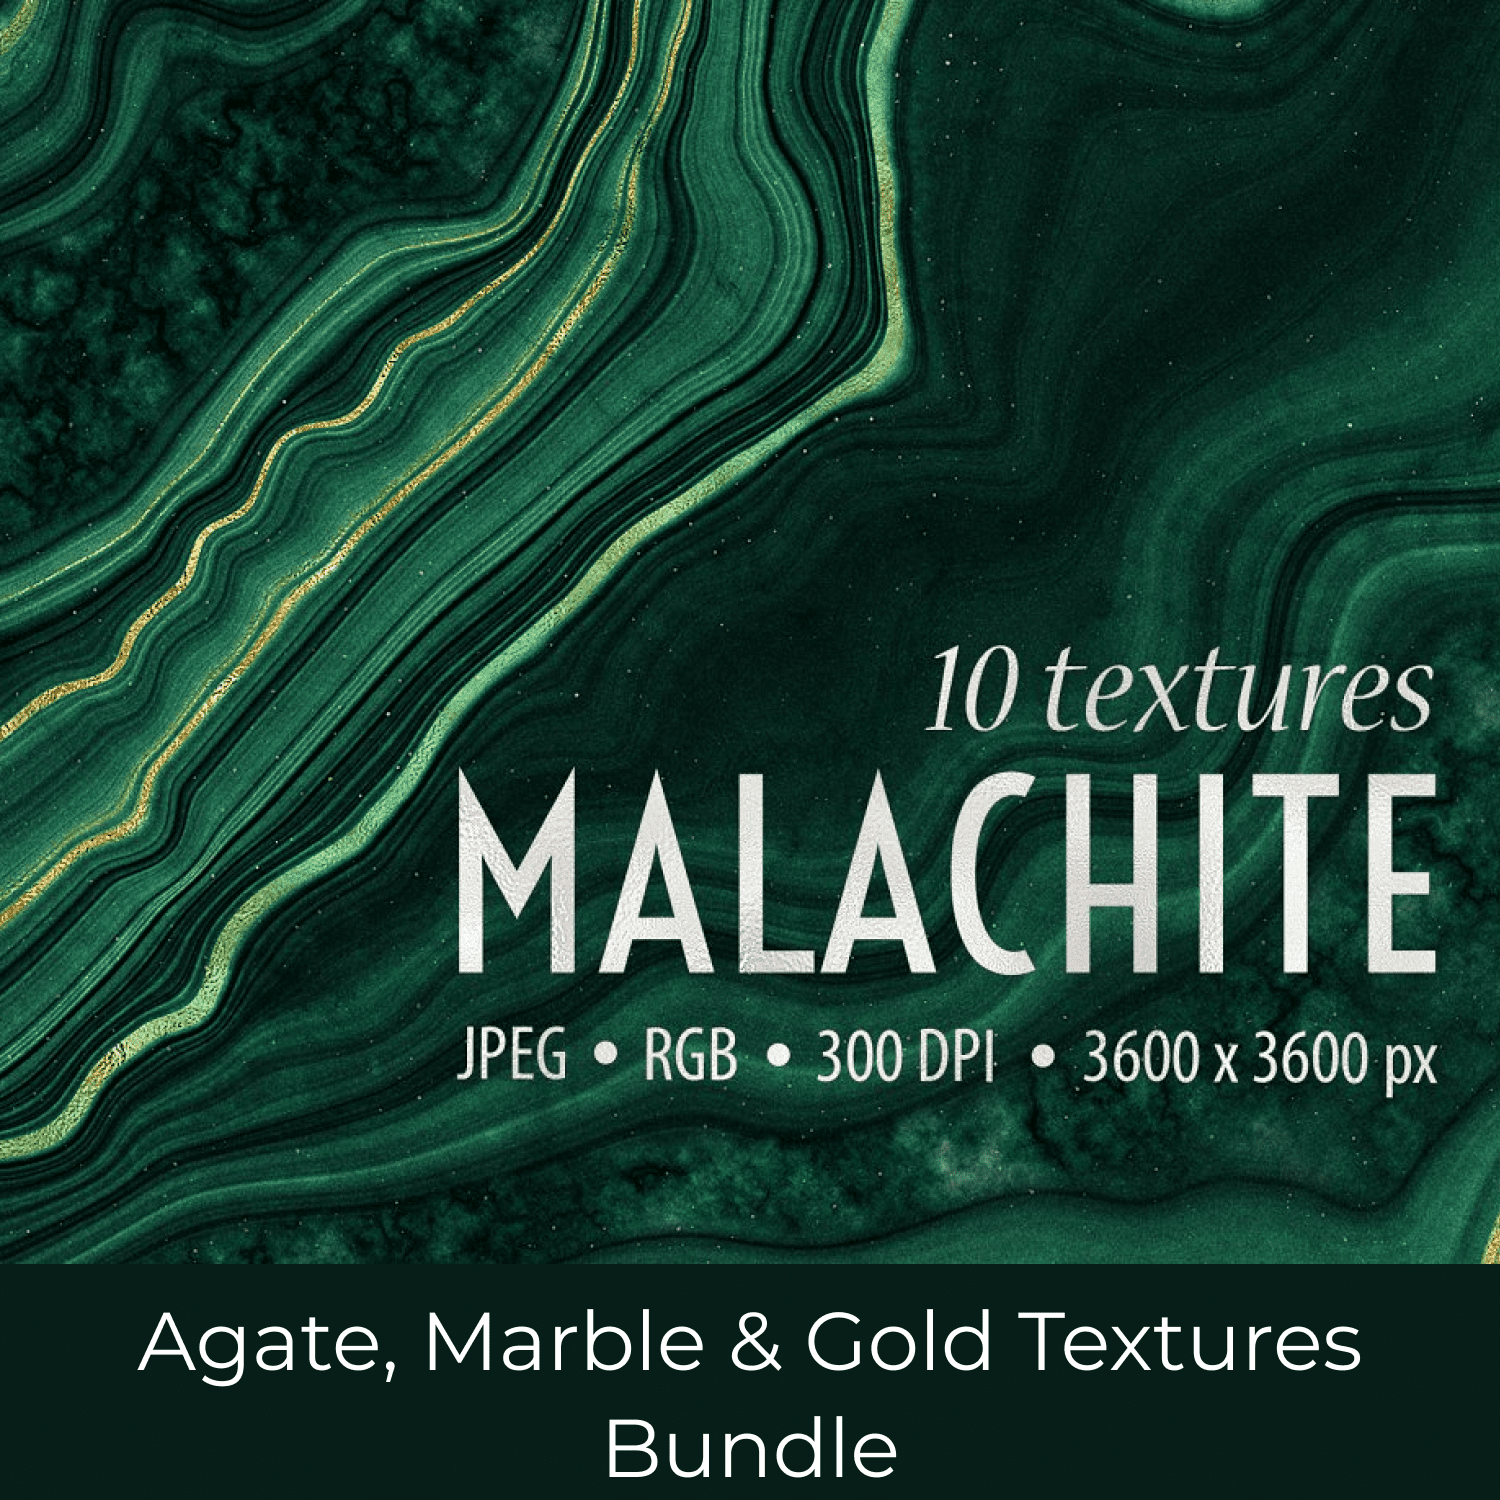 Agate, Marble & Gold Textures Bundle cover.